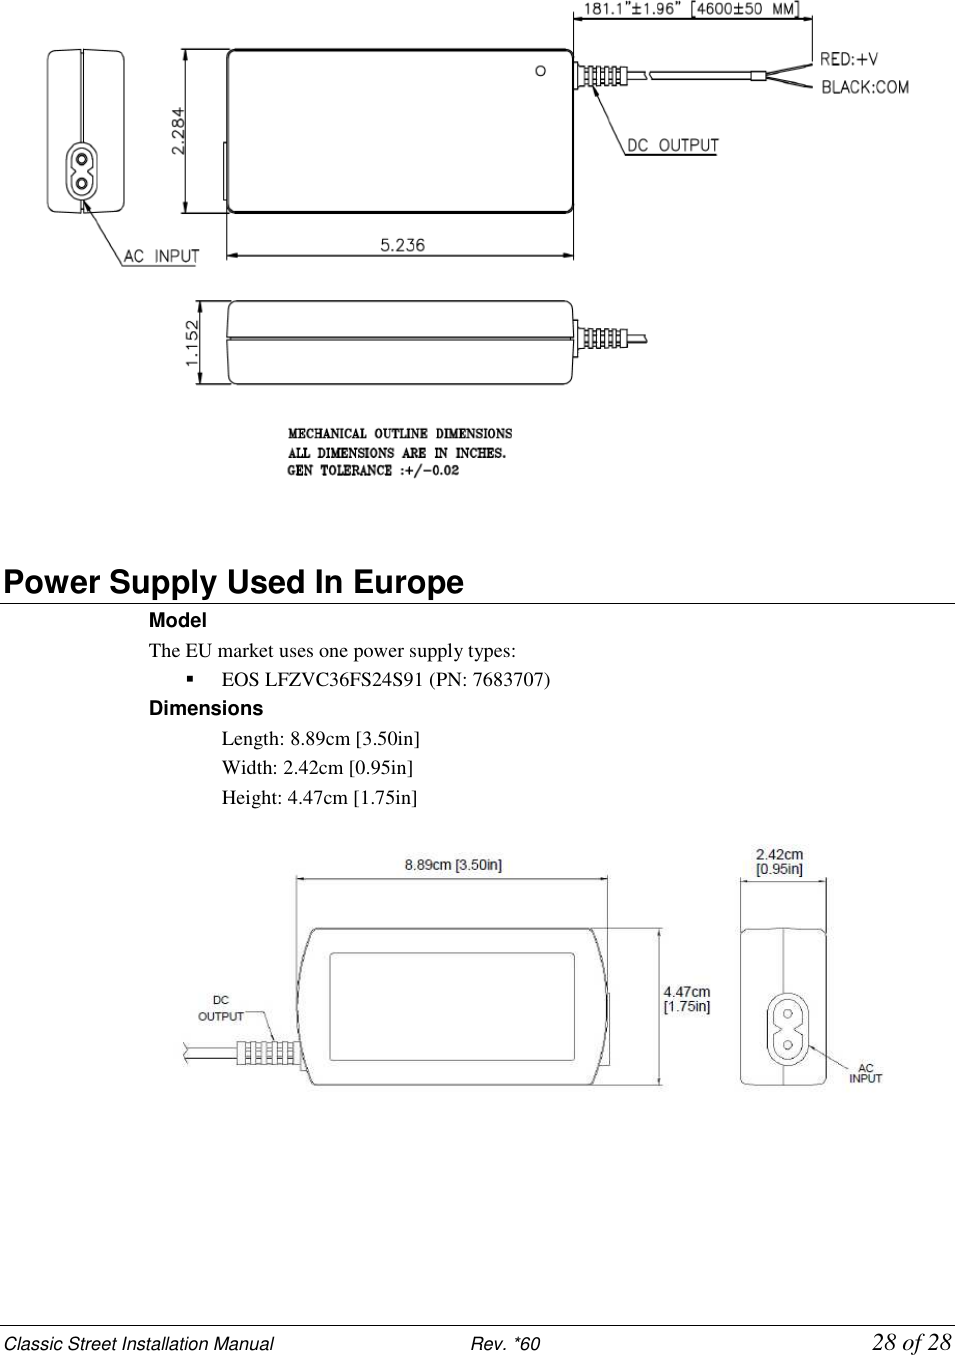 Classic Street Installation Manual                           Rev. *60           28 of 28  Power Supply Used In Europe Model The EU market uses one power supply types:  EOS LFZVC36FS24S91 (PN: 7683707) Dimensions Length: 8.89cm [3.50in]  Width: 2.42cm [0.95in]  Height: 4.47cm [1.75in]     